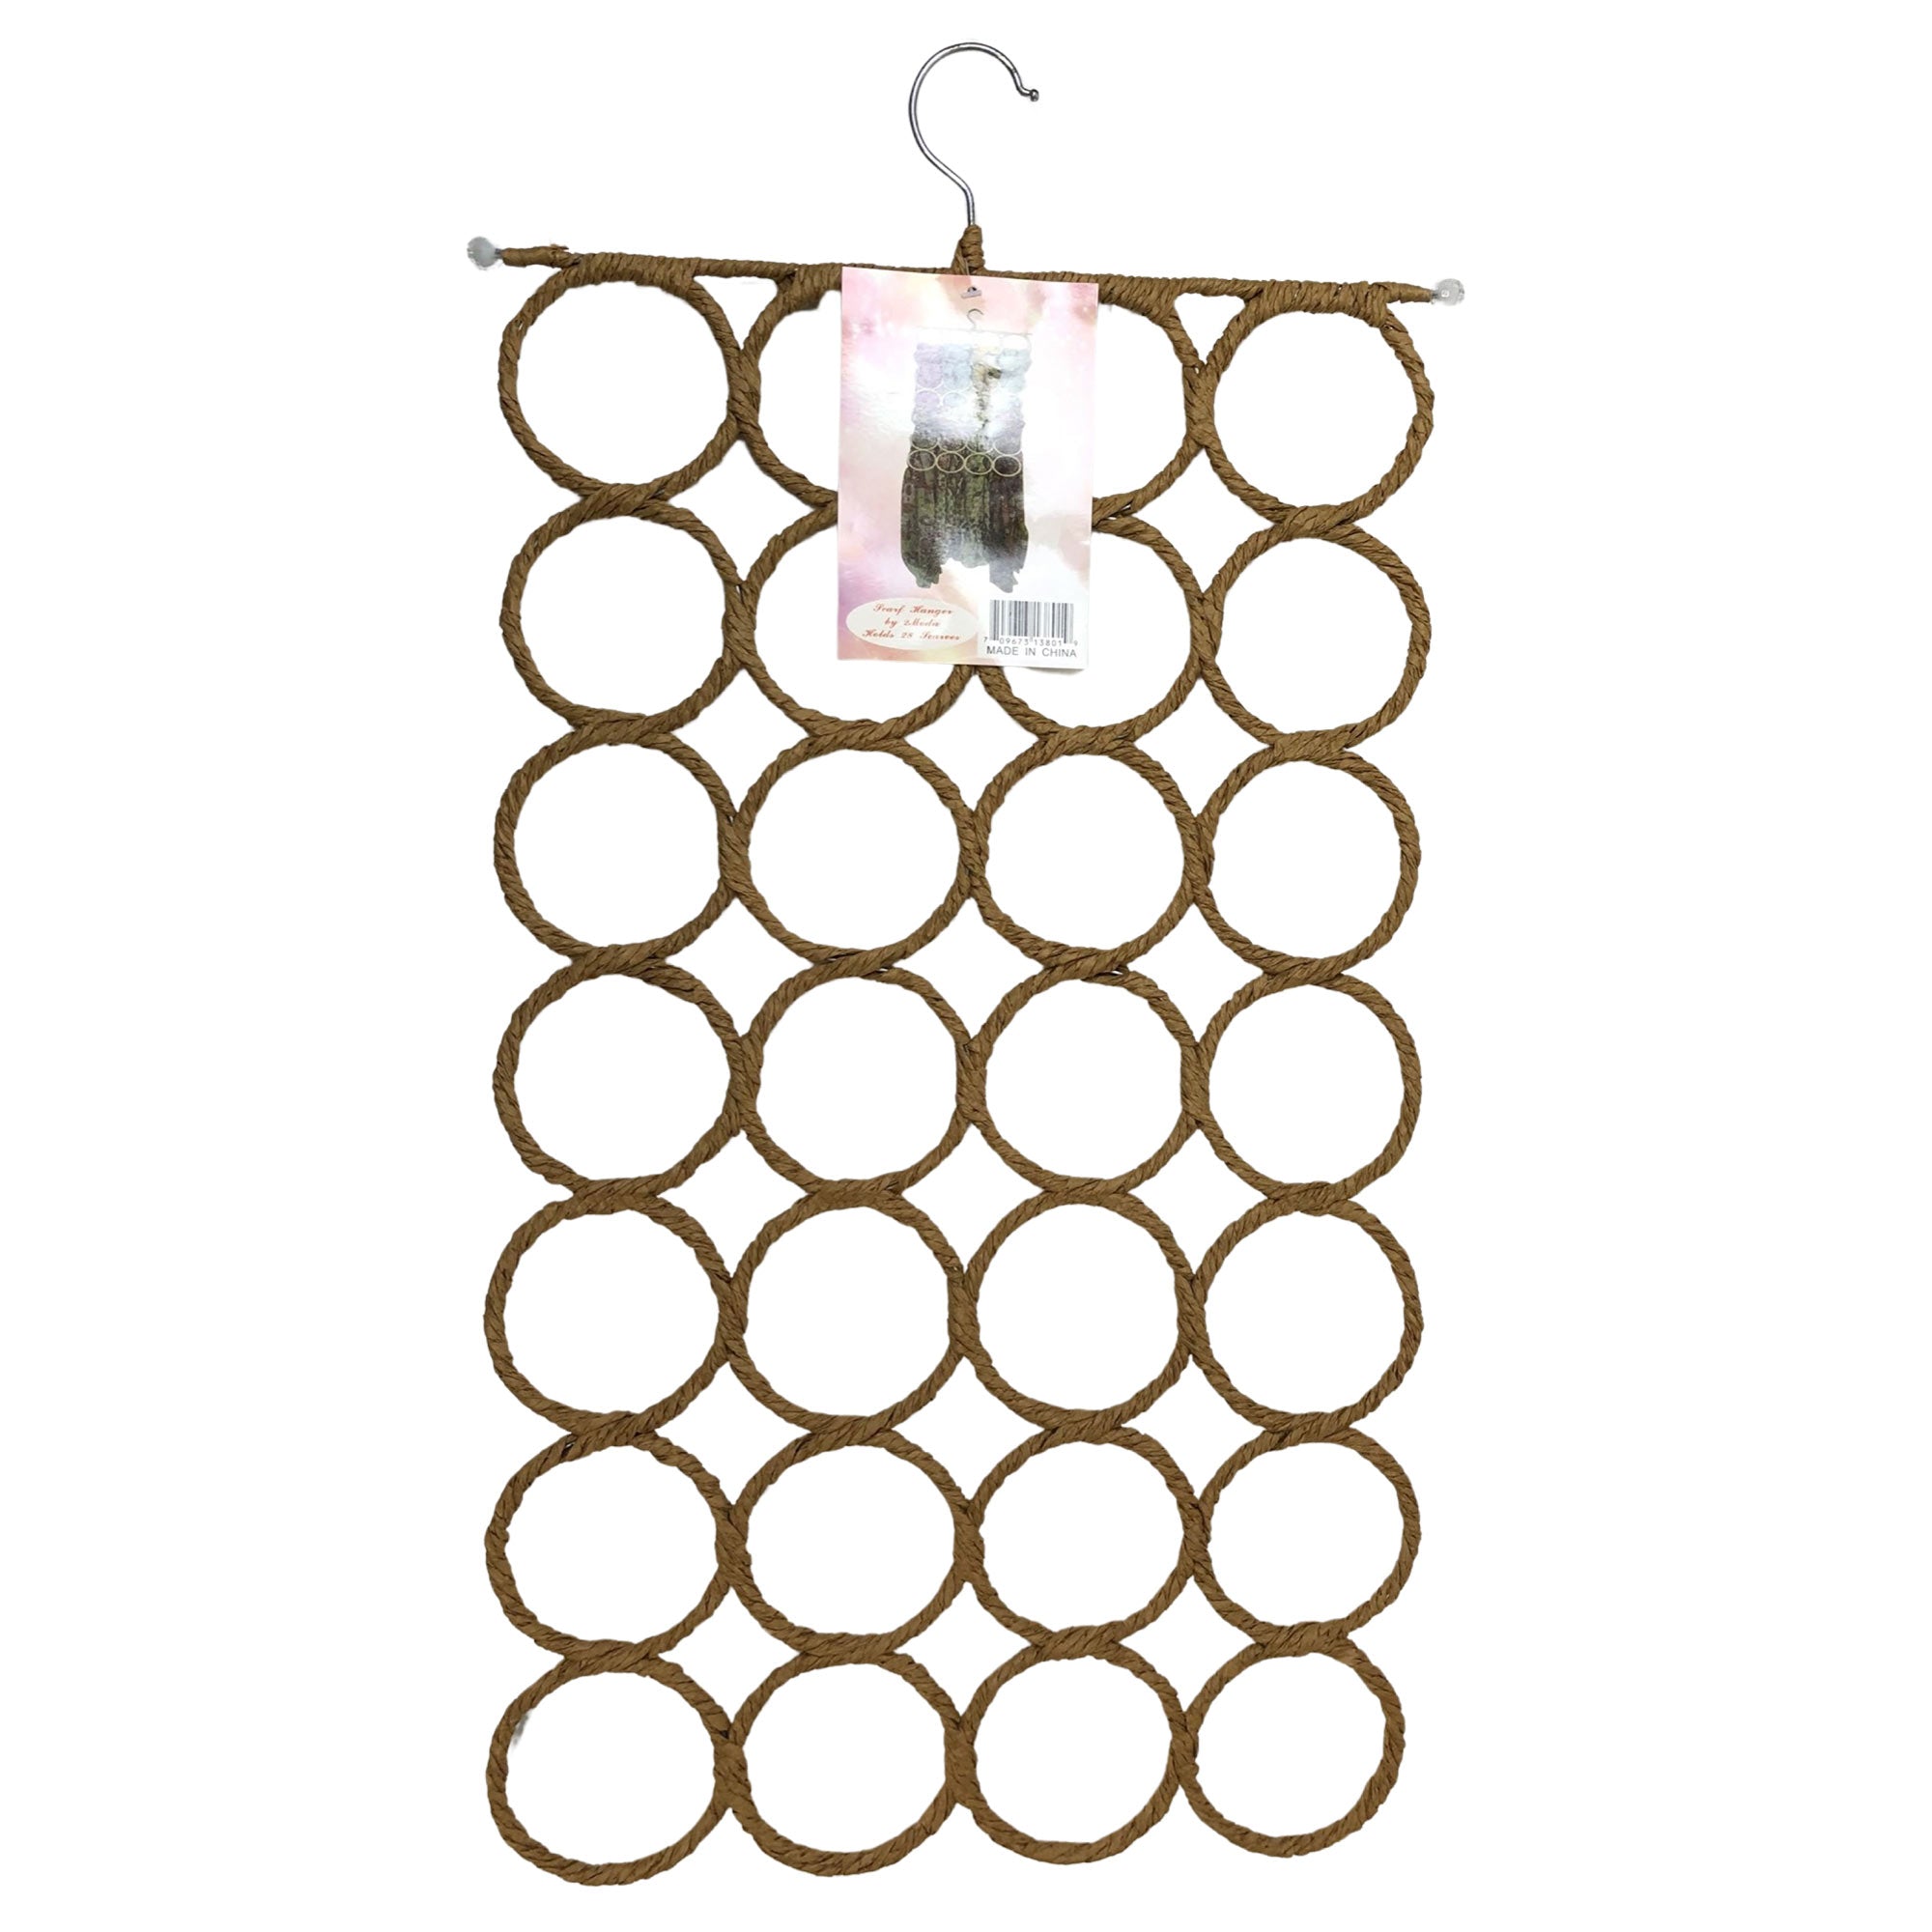 CLEARANCE WHOLESALE SCARF HANGERS (CASE OF 48 - $1.25 / PIECE)  Wholesale Scarf hangers in Assorted Colors SKU: 13801-48